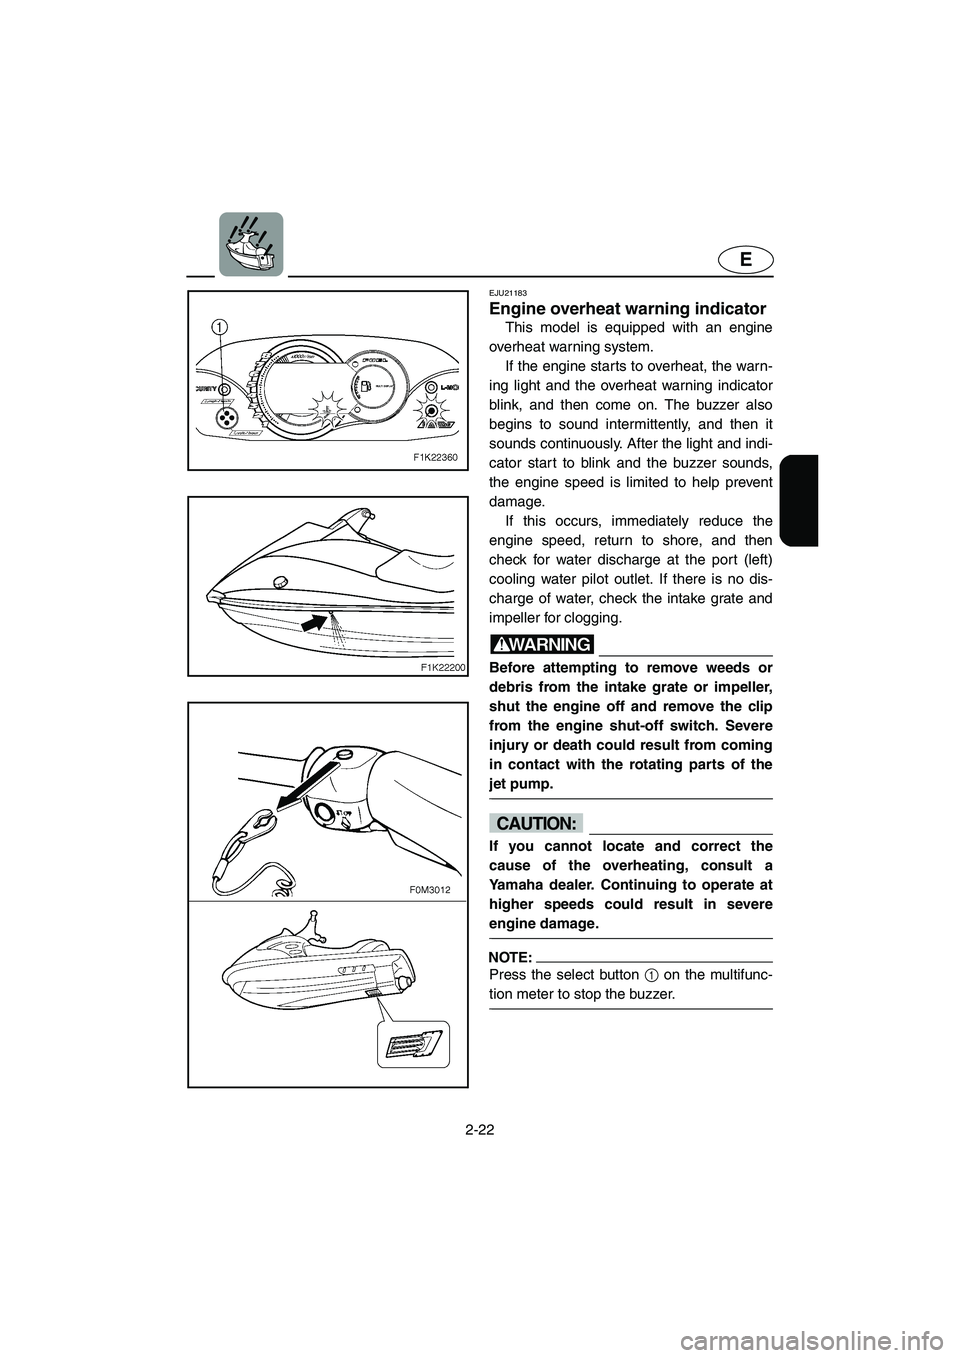 YAMAHA VX 2006  Owners Manual 2-22
E
EJU21183 
Engine overheat warning indicator 
This model is equipped with an engine
overheat warning system. 
If the engine starts to overheat, the warn-
ing light and the overheat warning indic